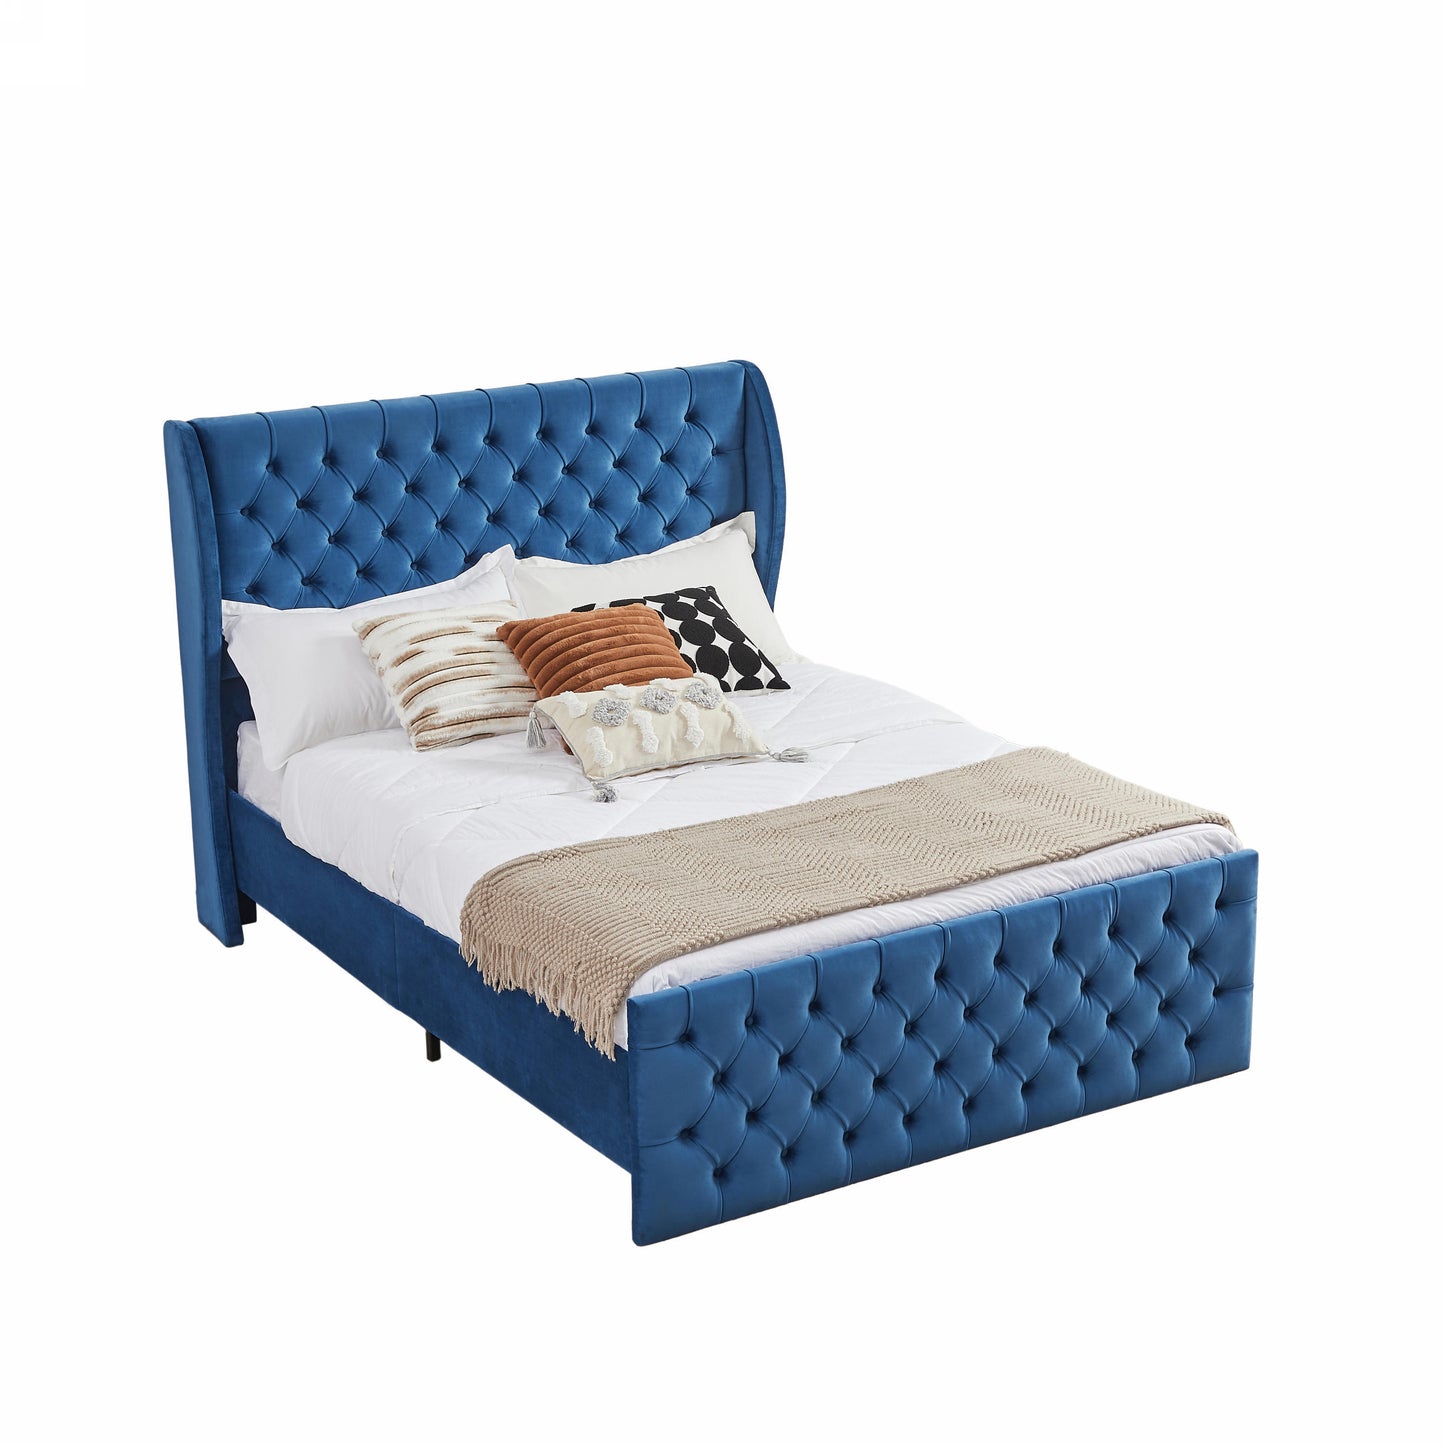 Rodeo Drive Collection Upholstered Wingback Velvet Fabric Chesterfield Bed/Button Tufted Headboard with Vintage Wing/Wood Slat Support/Easy Assemble. Queen-Blue